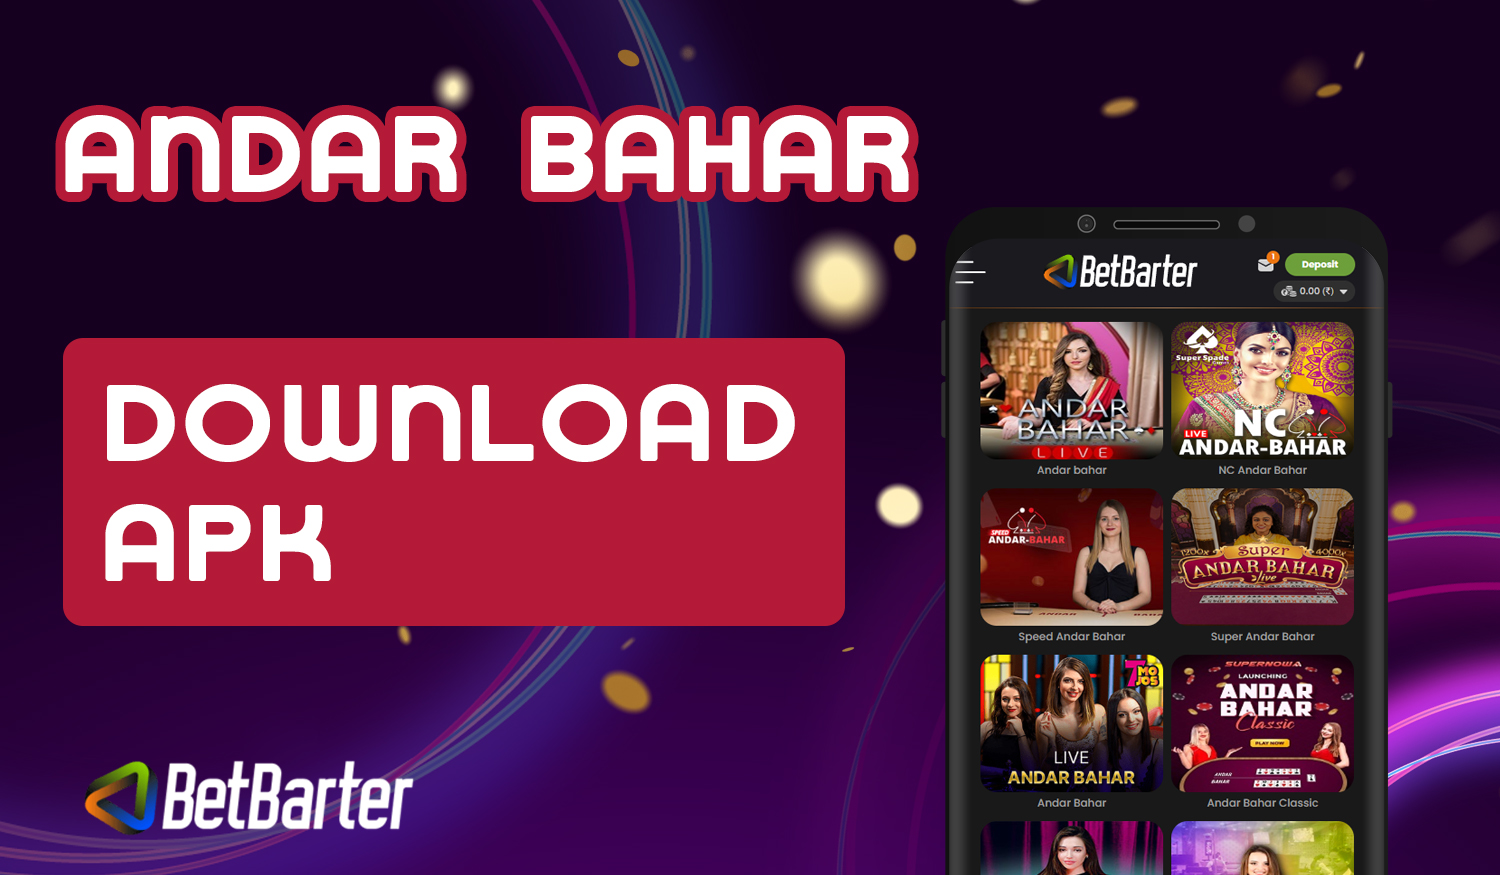 How to download BetBarter mobile app on your Android device to play Andar Bahar